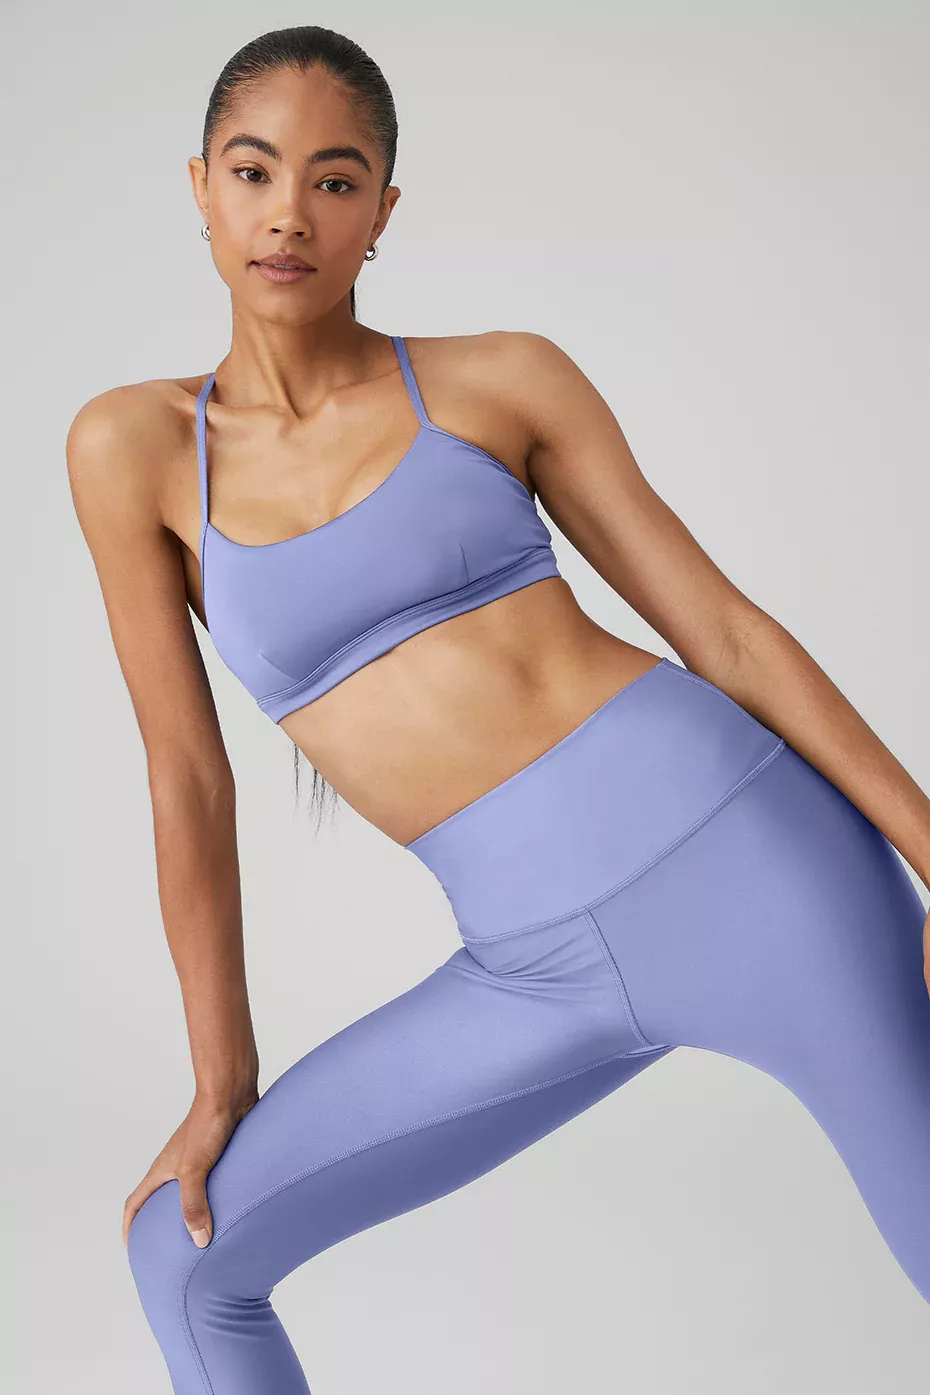 Alo Airlift Excite Bra & High-Waist Airlift Legging Set, Alo Has a Bunch  of Cute Sets You Can Both Work Out and Lounge In